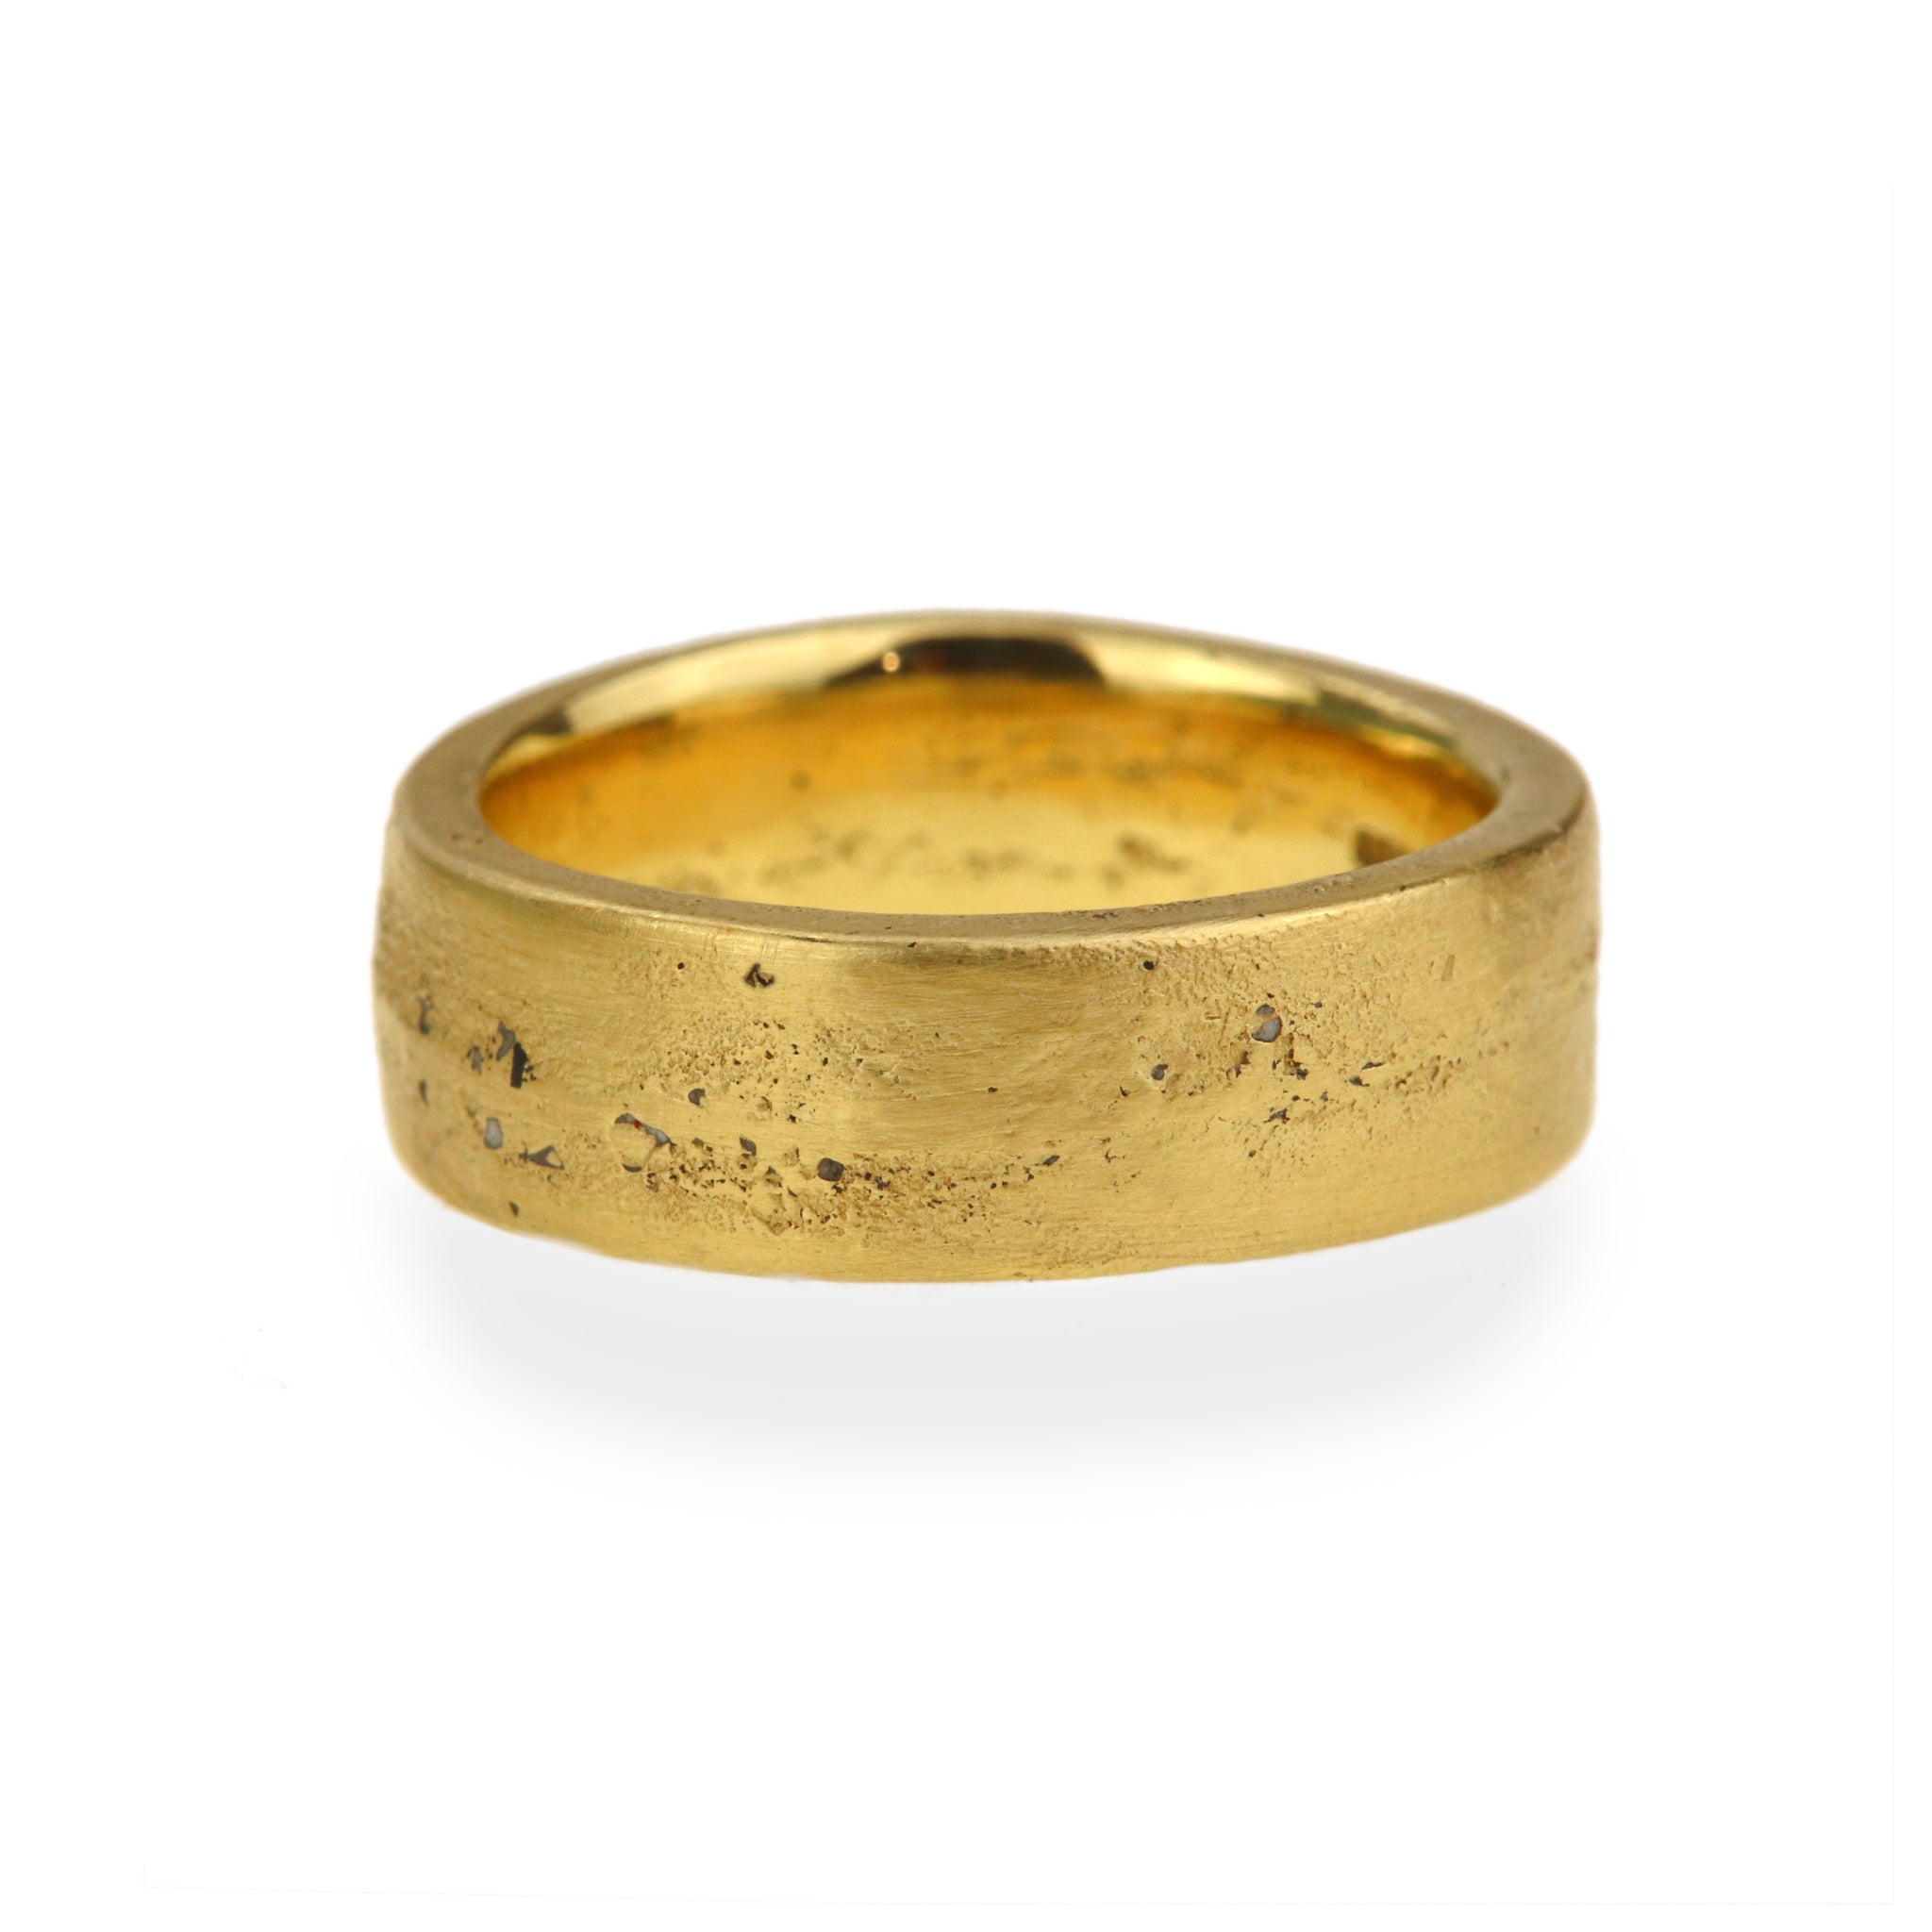 Sandcast 18ct Yellow Gold 7mm Ring